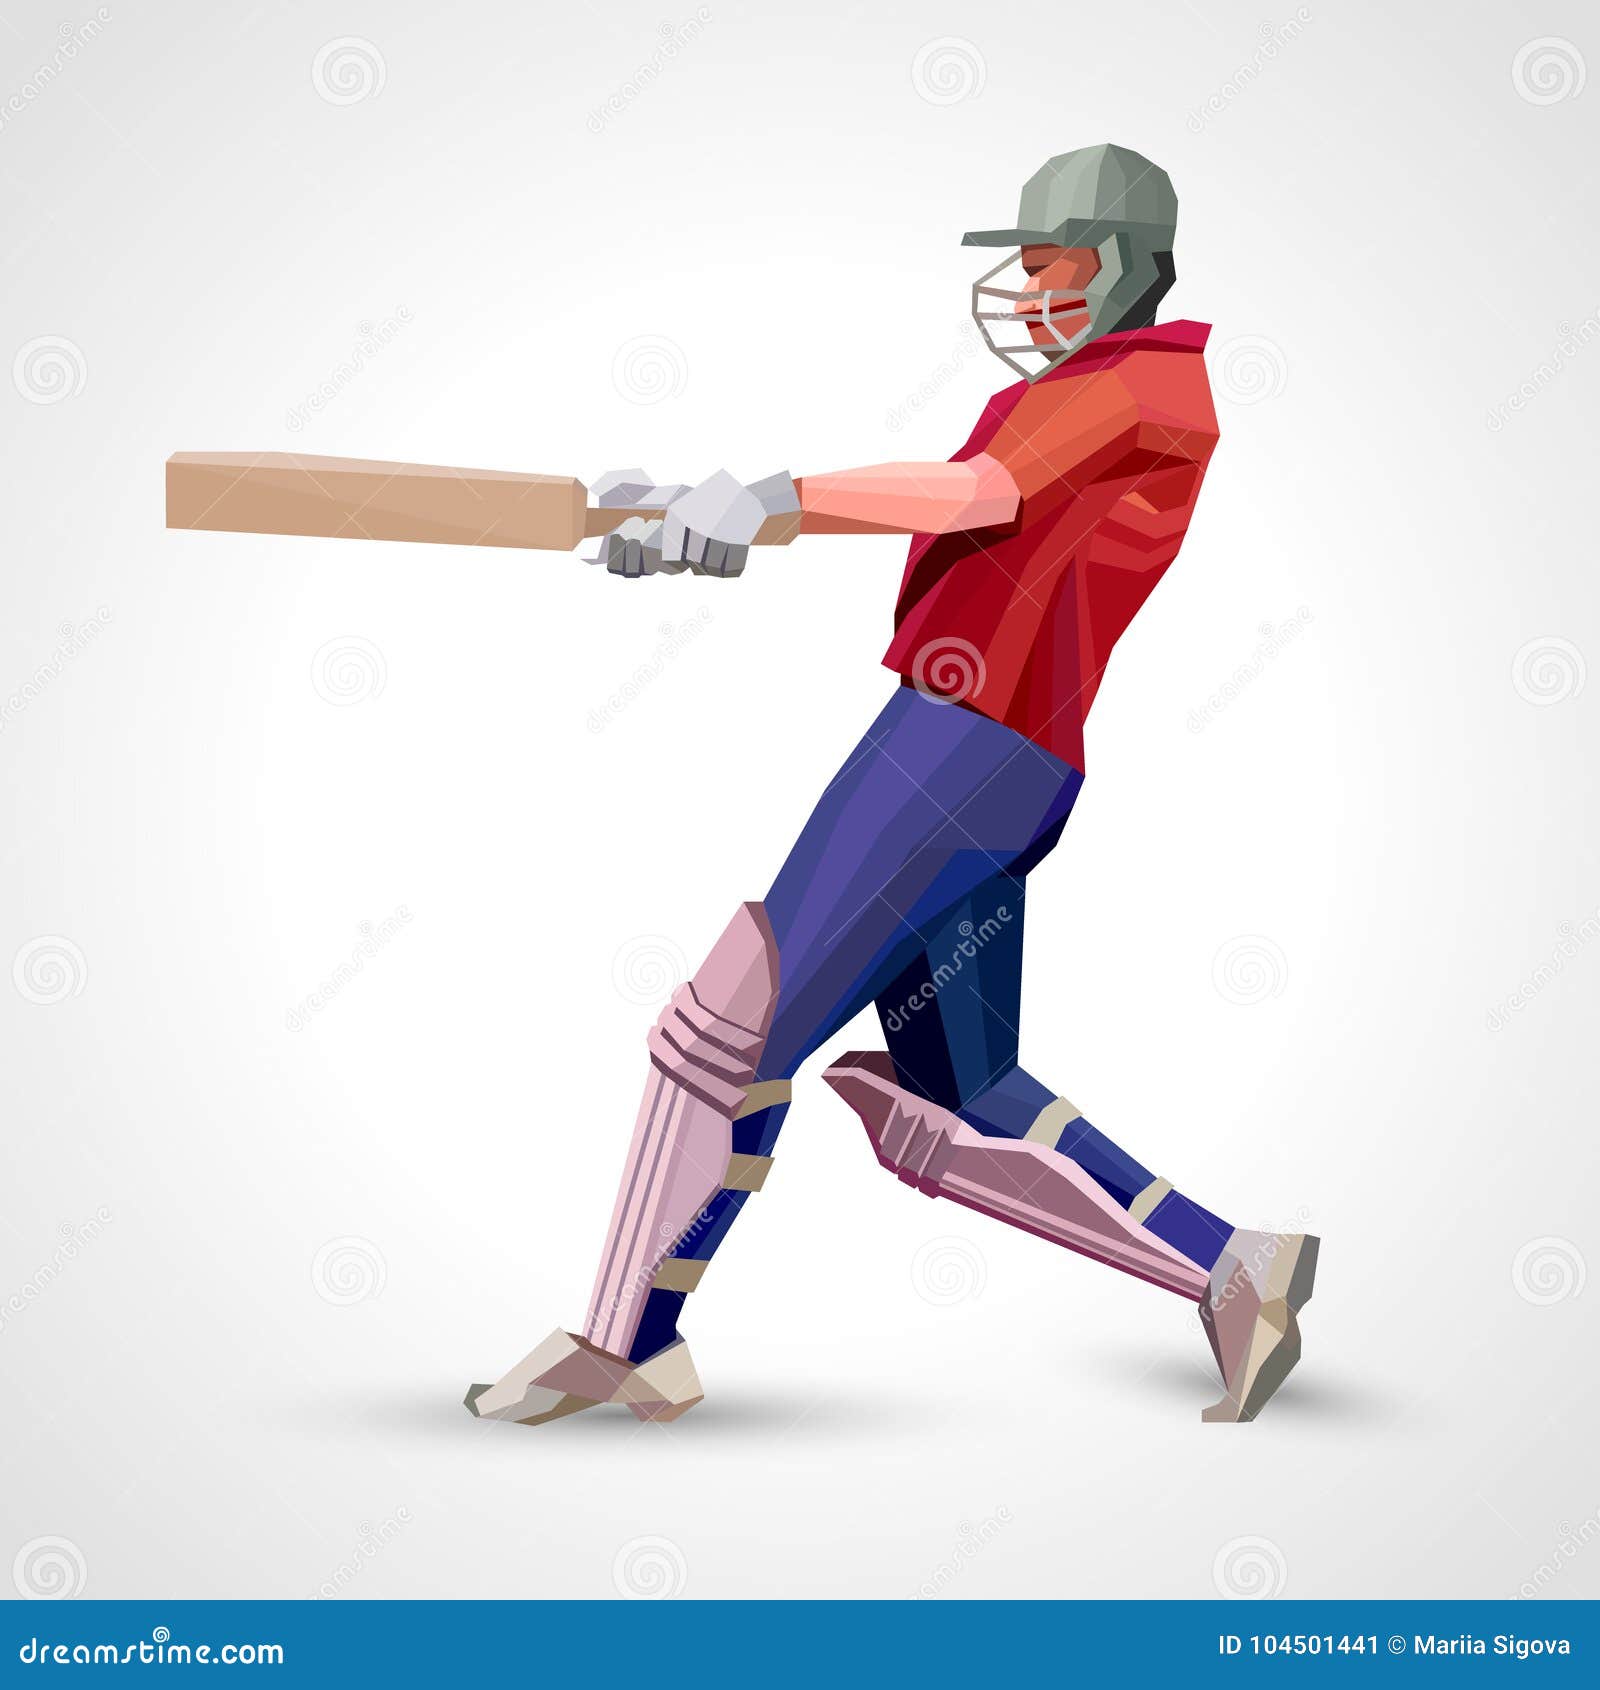 Batsman Playing Cricket Pen Tool Created Clipping Path Included Jpeg Stock  Photo by ©redshinestudio 495626470